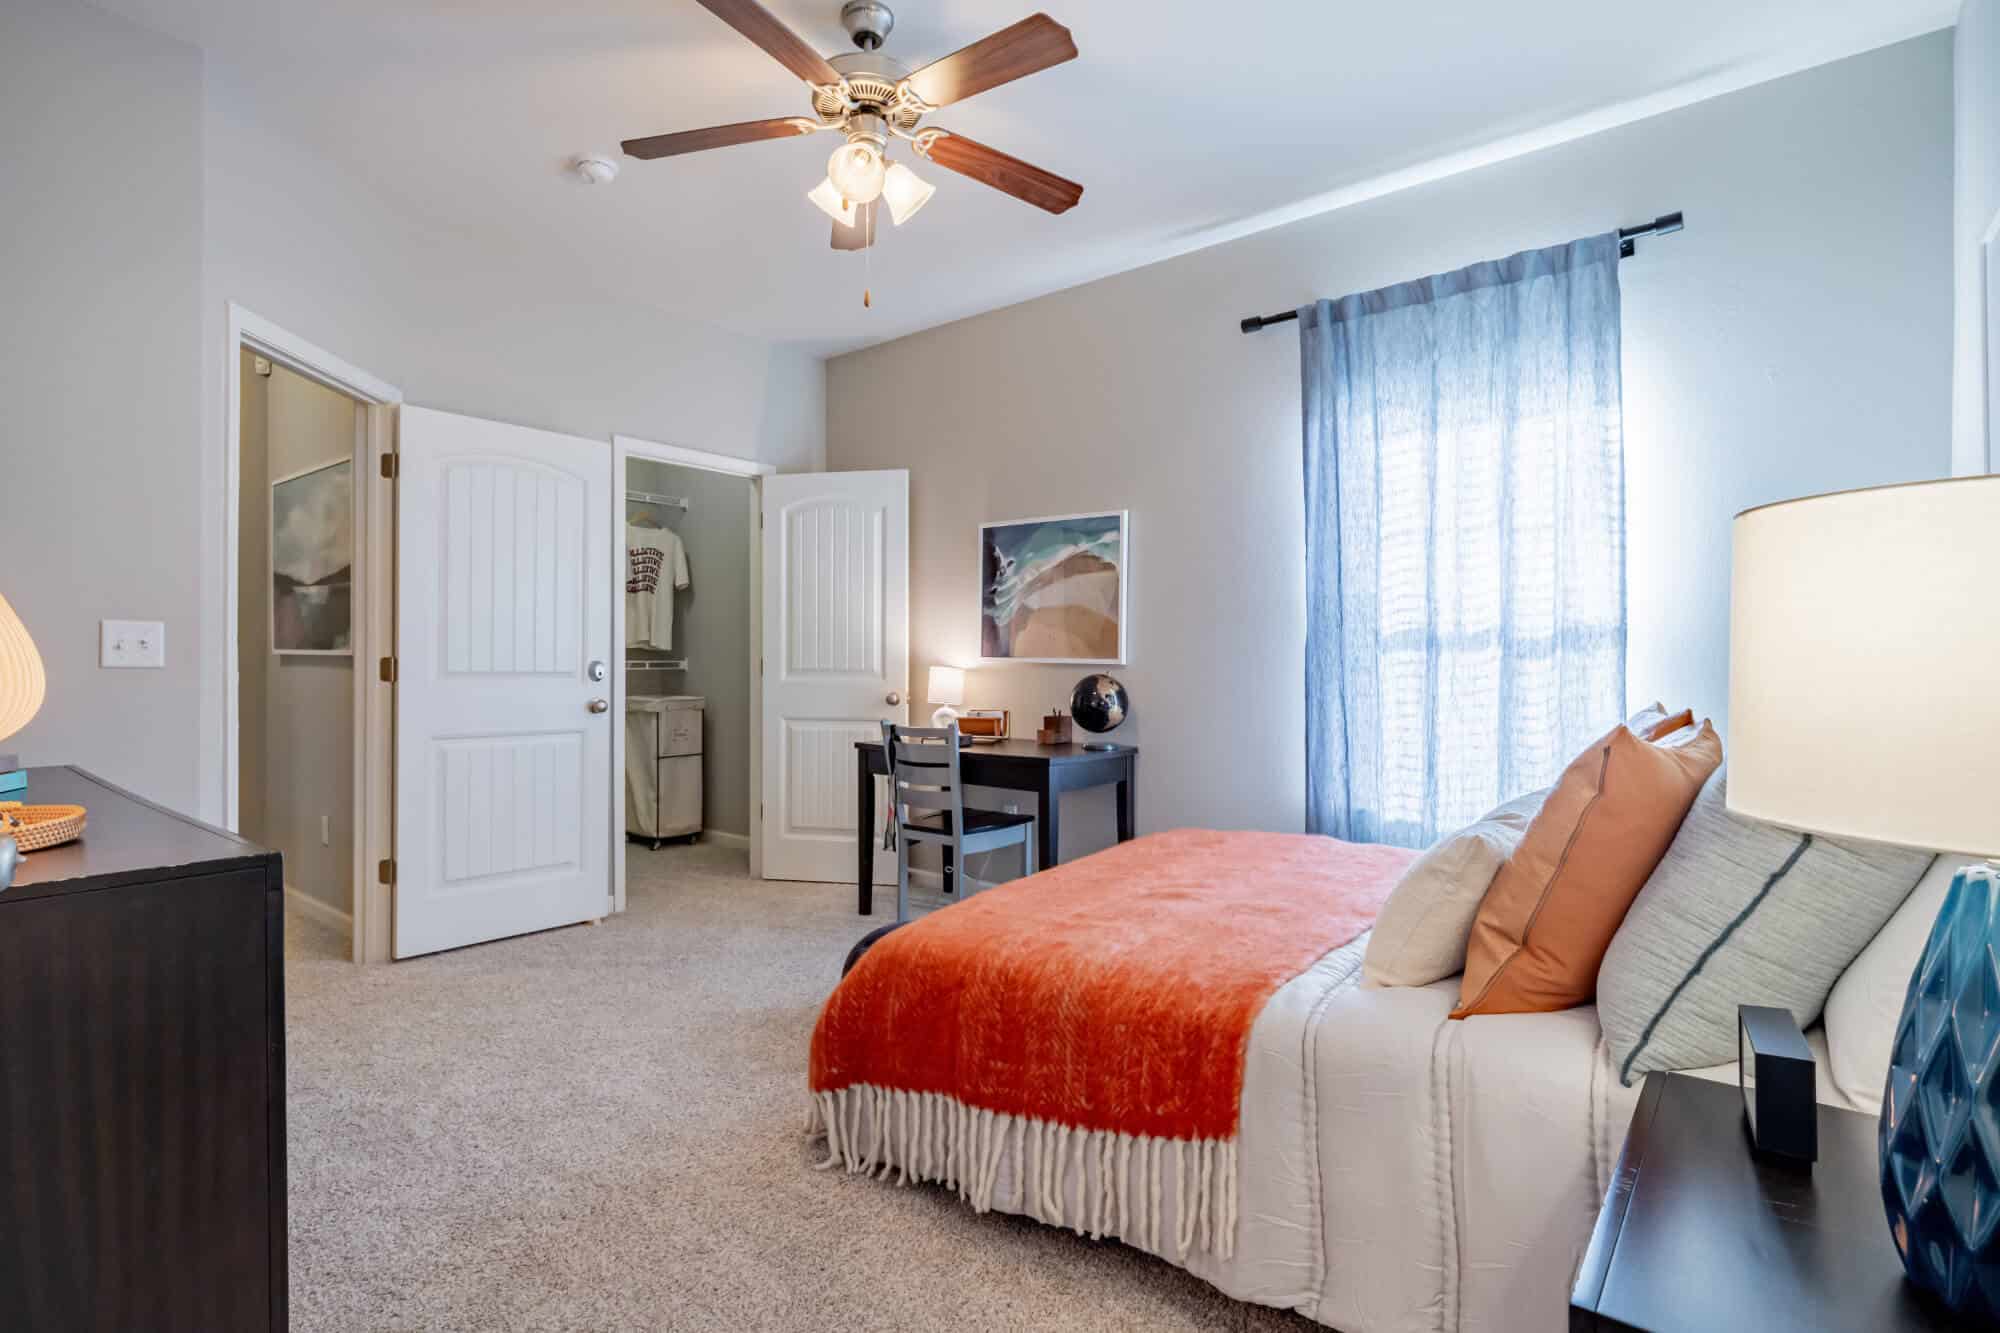 the collective at norman off campus cottage apartments near the university of oklahoma furnished and unfurnished options large private bedrooms walk in closet